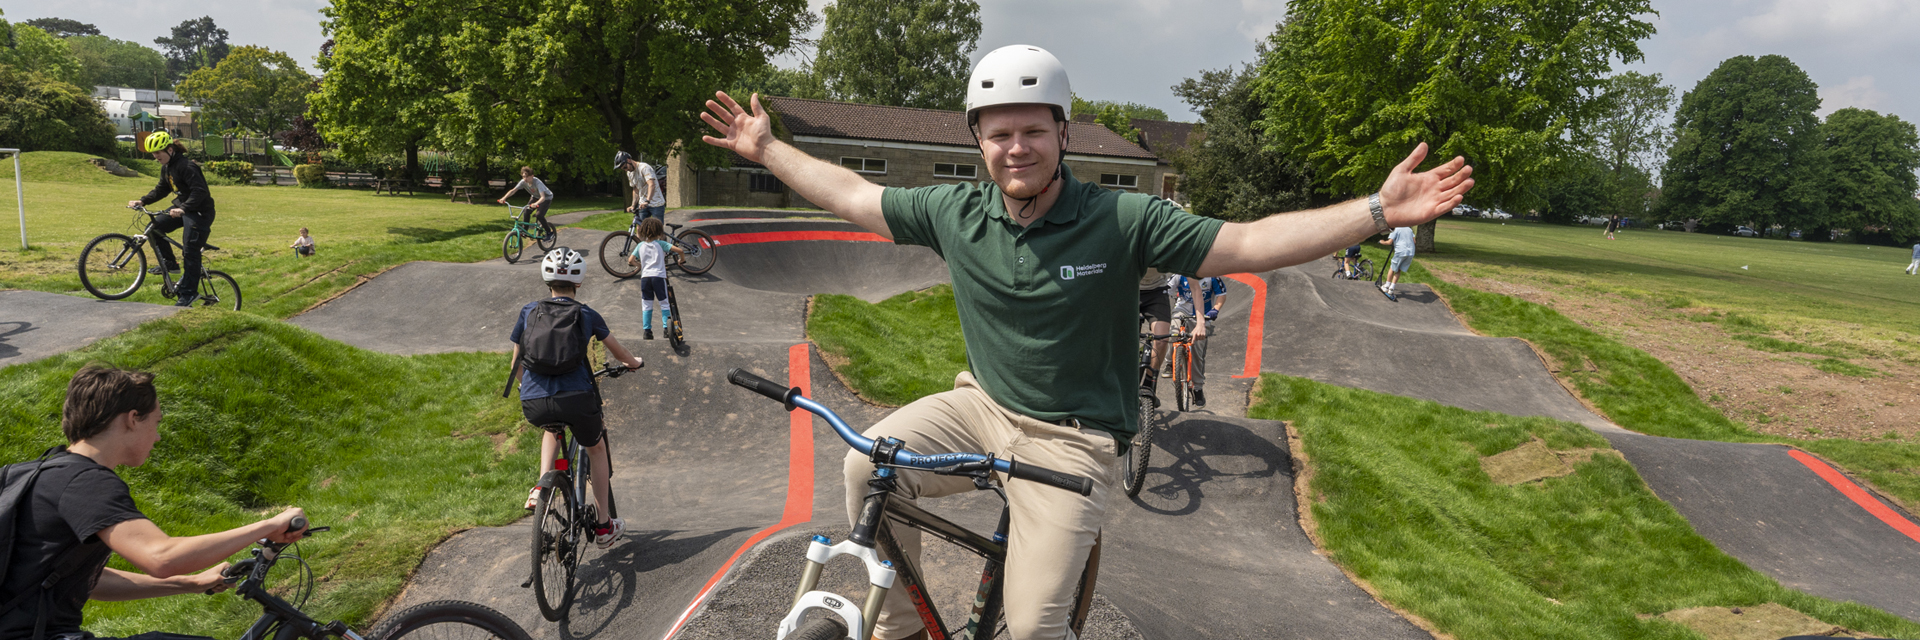 Donation from Tytherington quarry helps make pump dream track a reality